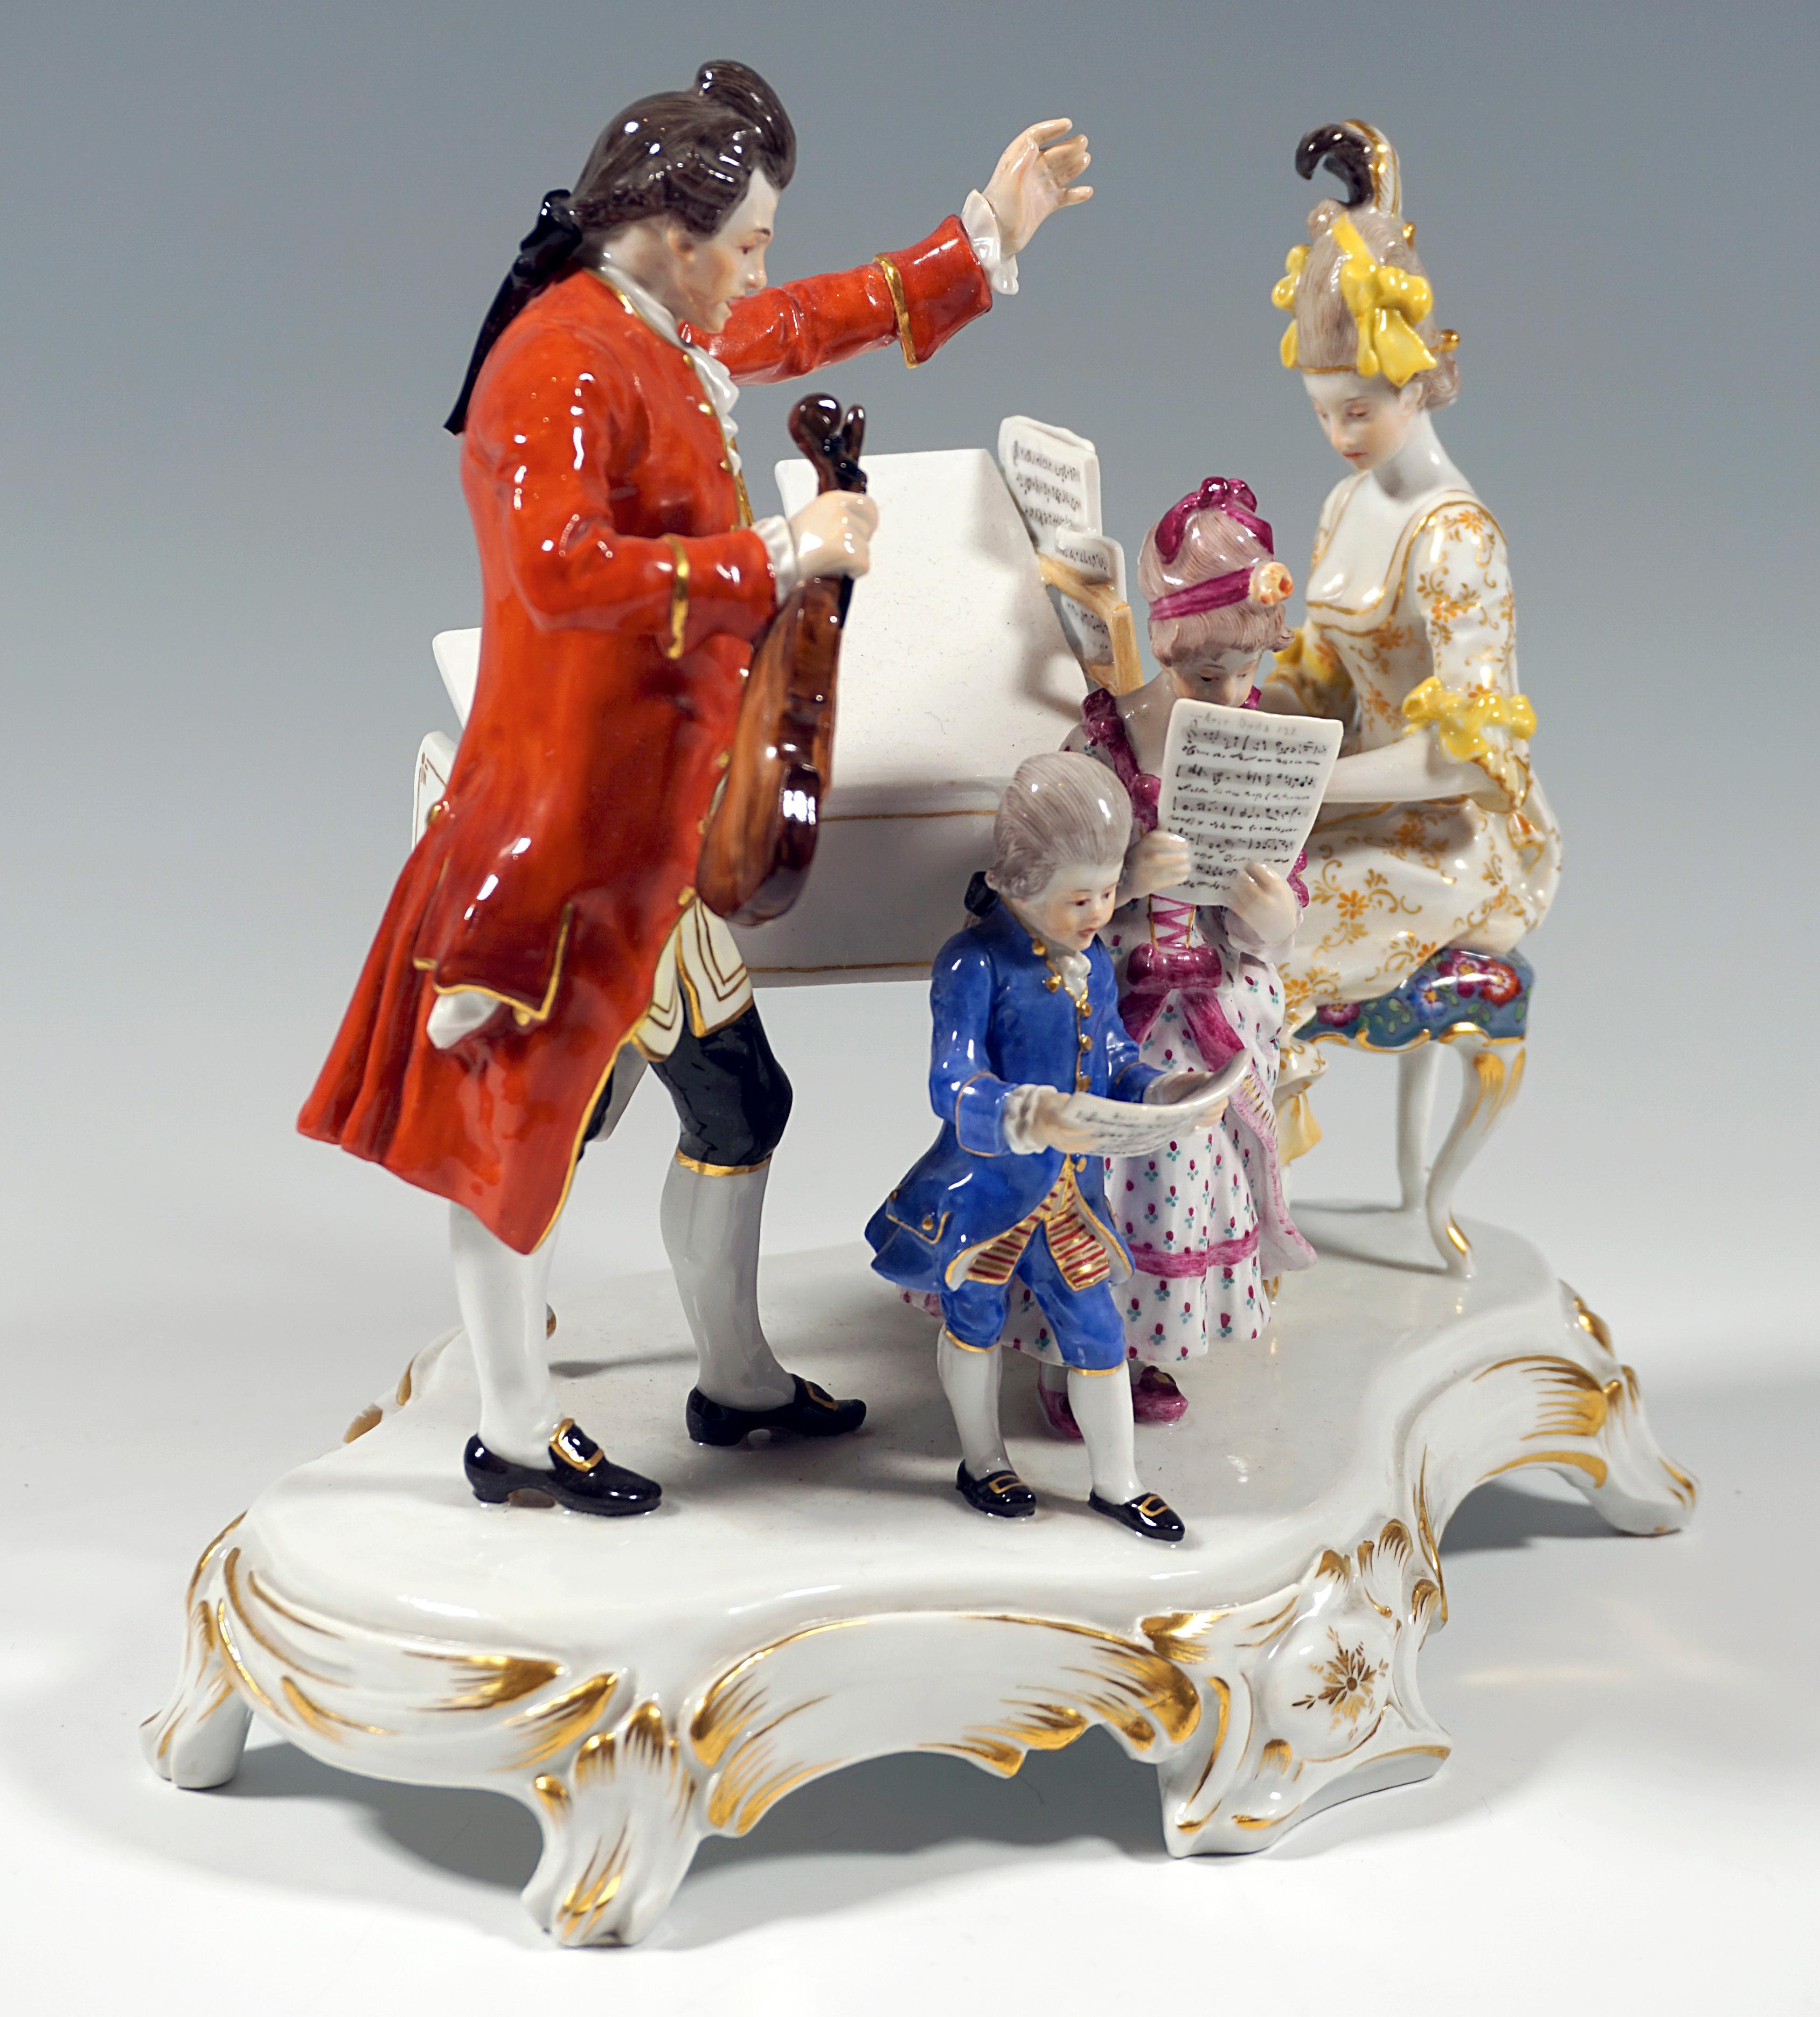 Exceptional Meissen porcelain genre group:
Family group dressed in rococo style playing house music: the mother with a decorated updo in a flowered dress sitting at the piano, the children, girl and boy also finely dressed, holding music sheets in